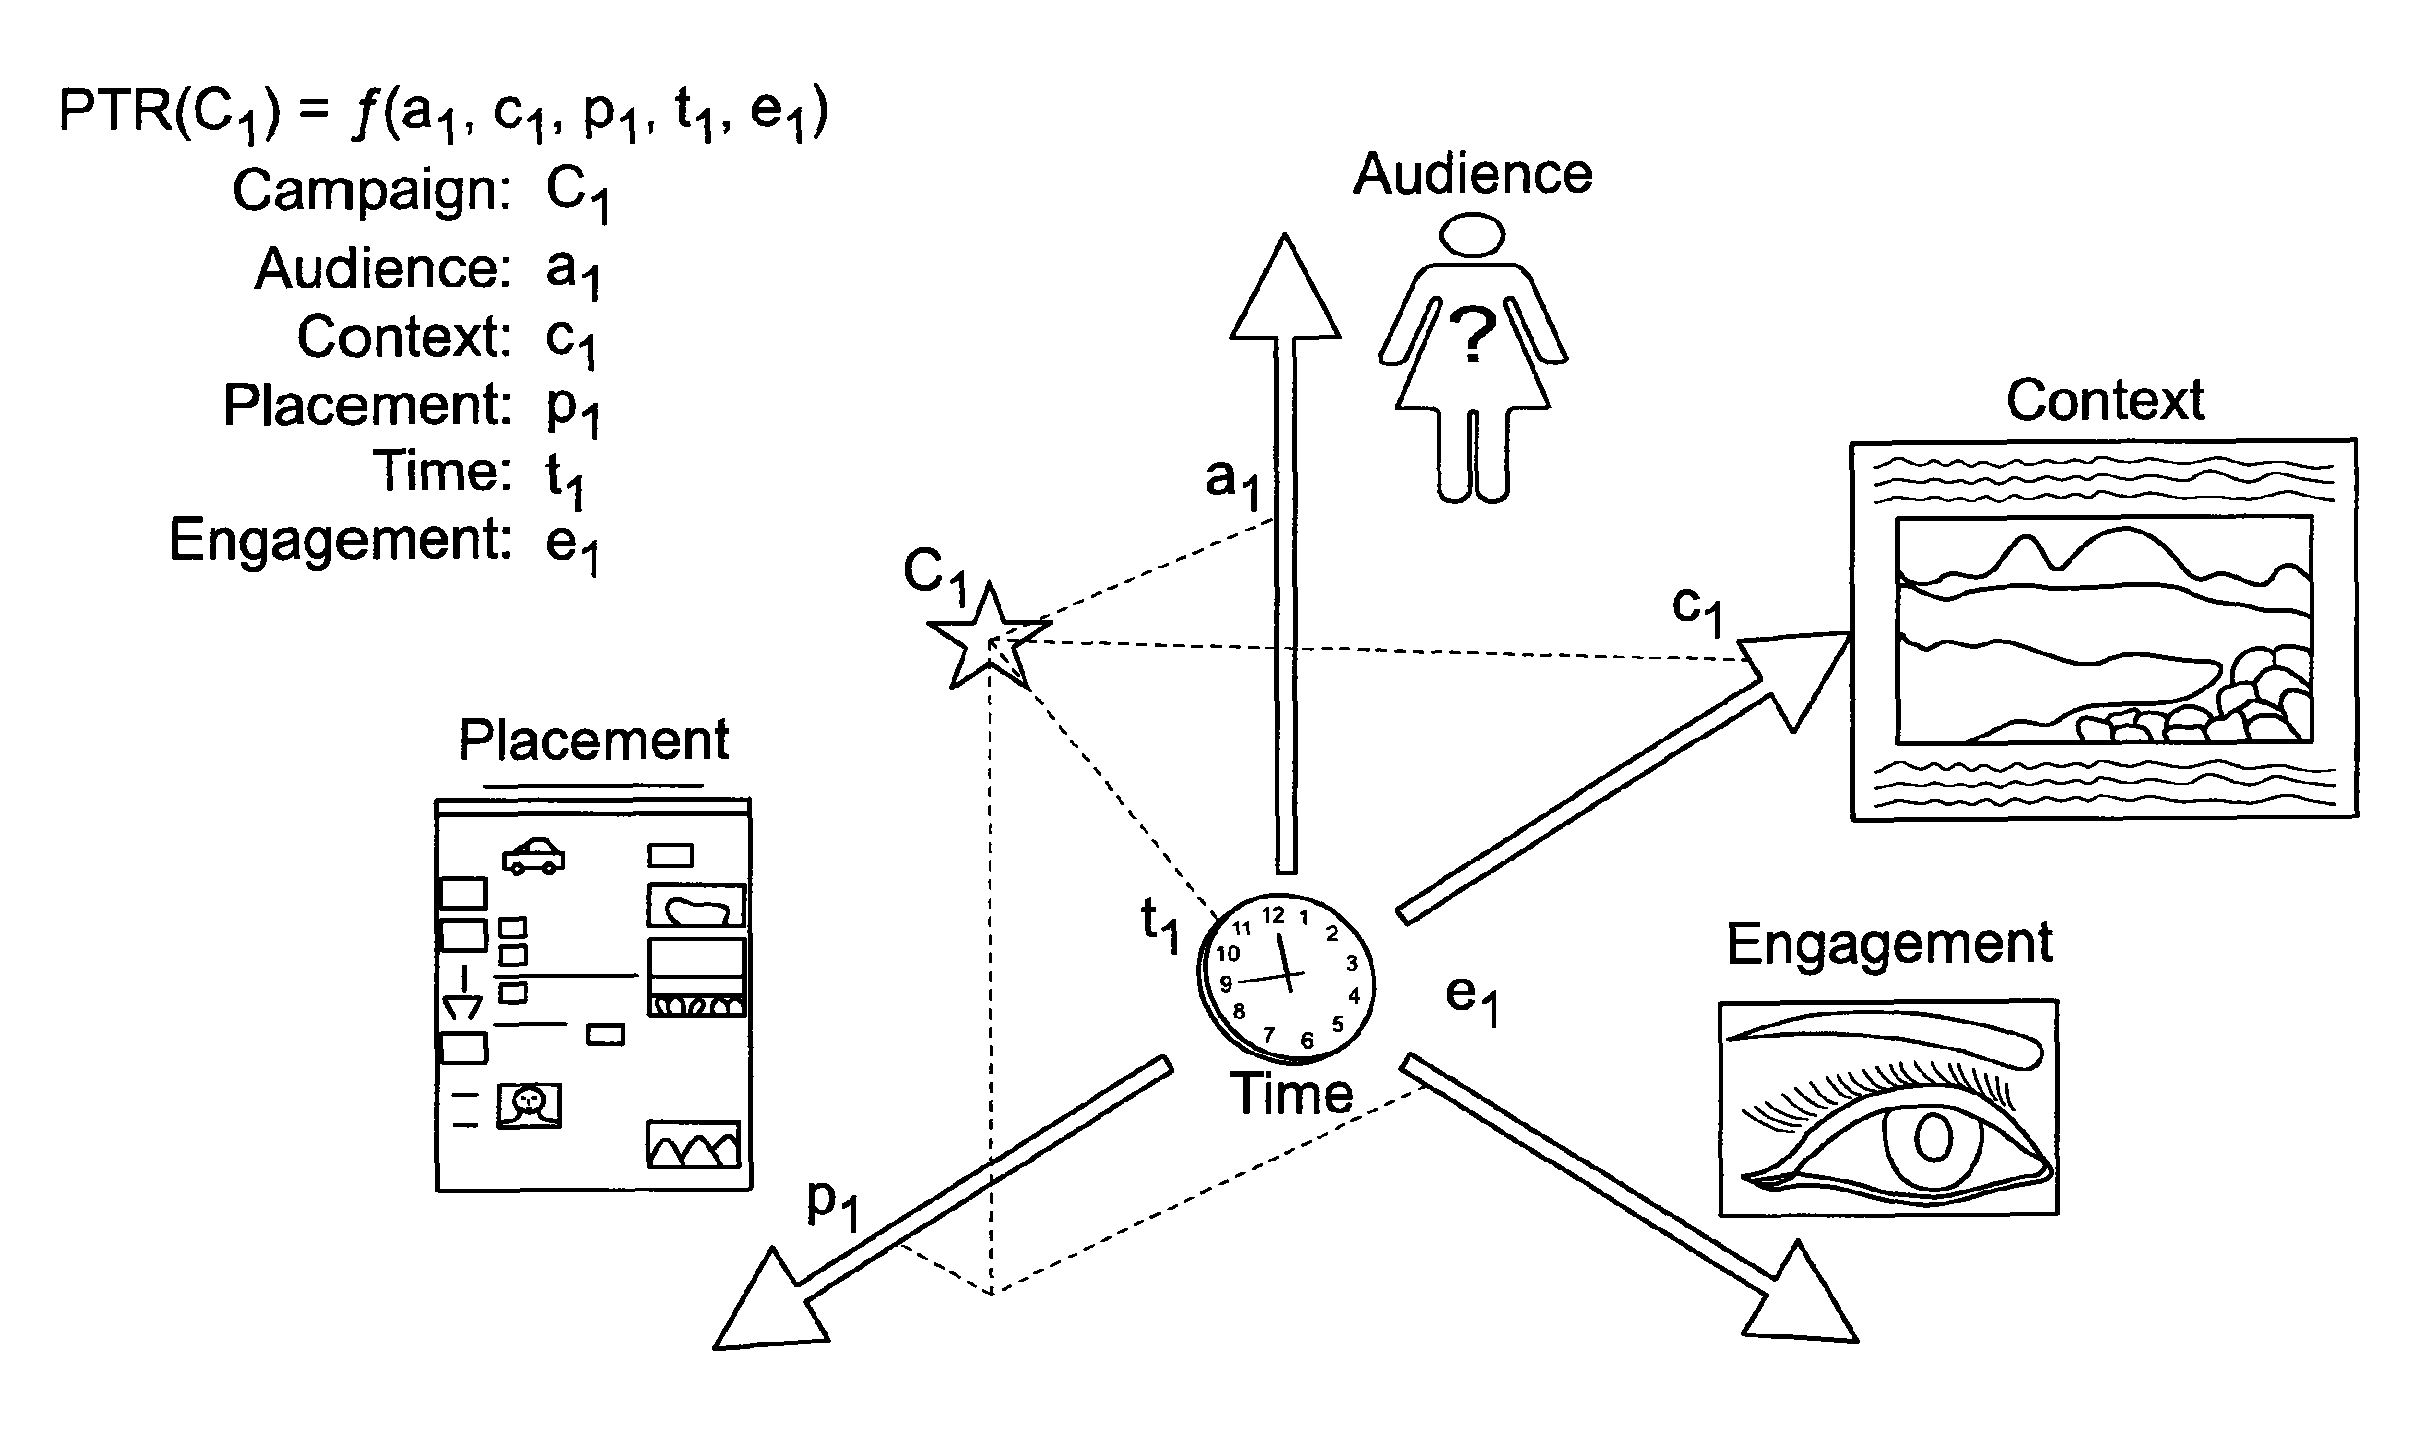 Multi-dimensional method for optimized delivery of targeted on-line brand advertisements